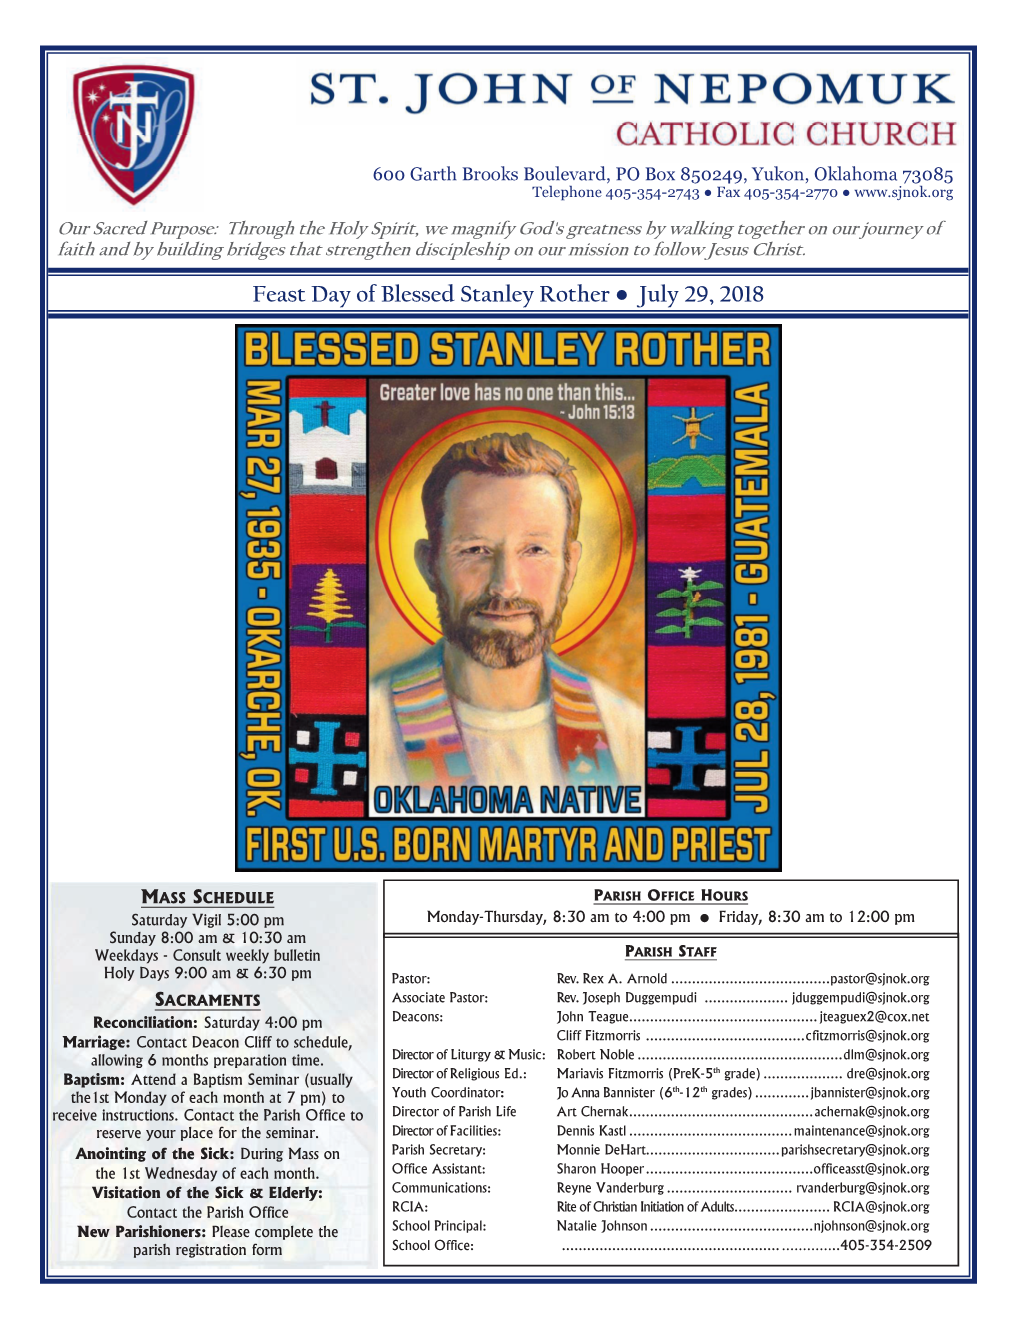 Feast Day of Blessed Stanley Rother July 29, 2018